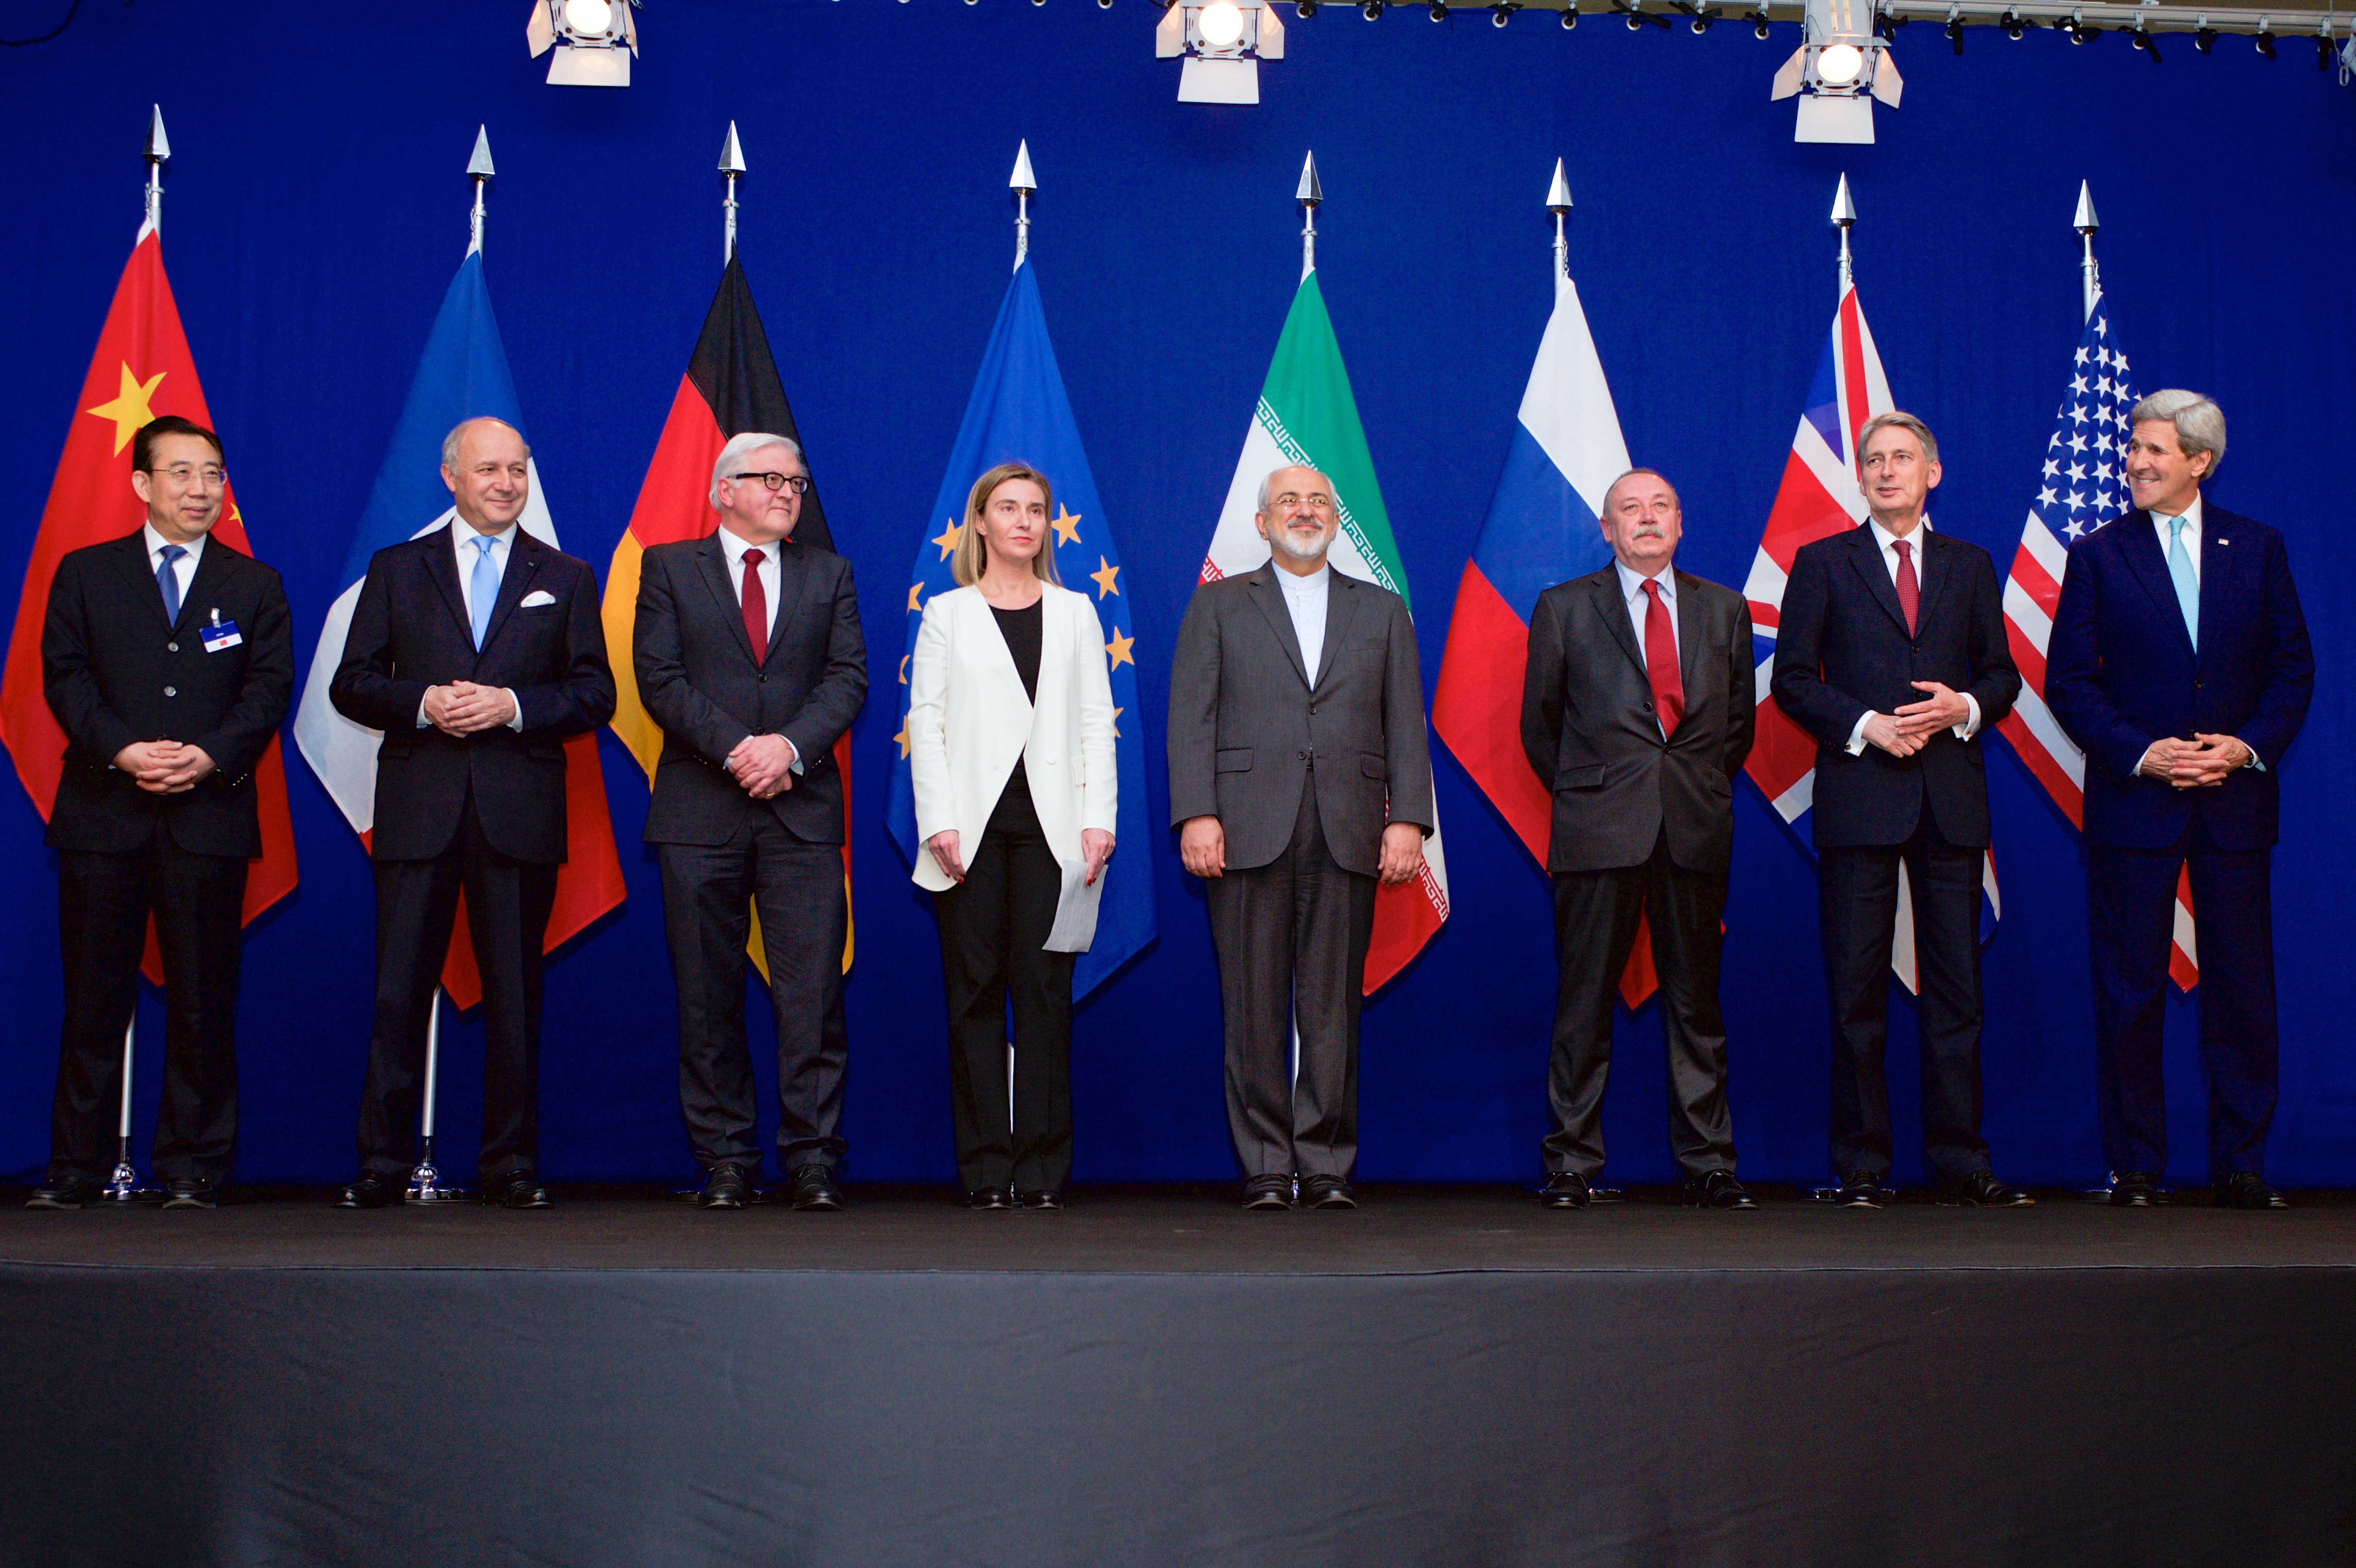 https://upload.wikimedia.org/wikipedia/commons/4/4a/Negotiations_about_Iranian_Nuclear_Program_-_the_Ministers_of_Foreign_Affairs_and_Other_Officials_of_the_P5+1_and_Ministers_of_Foreign_Affairs_of_Iran_and_EU_in_Lausanne.jpg